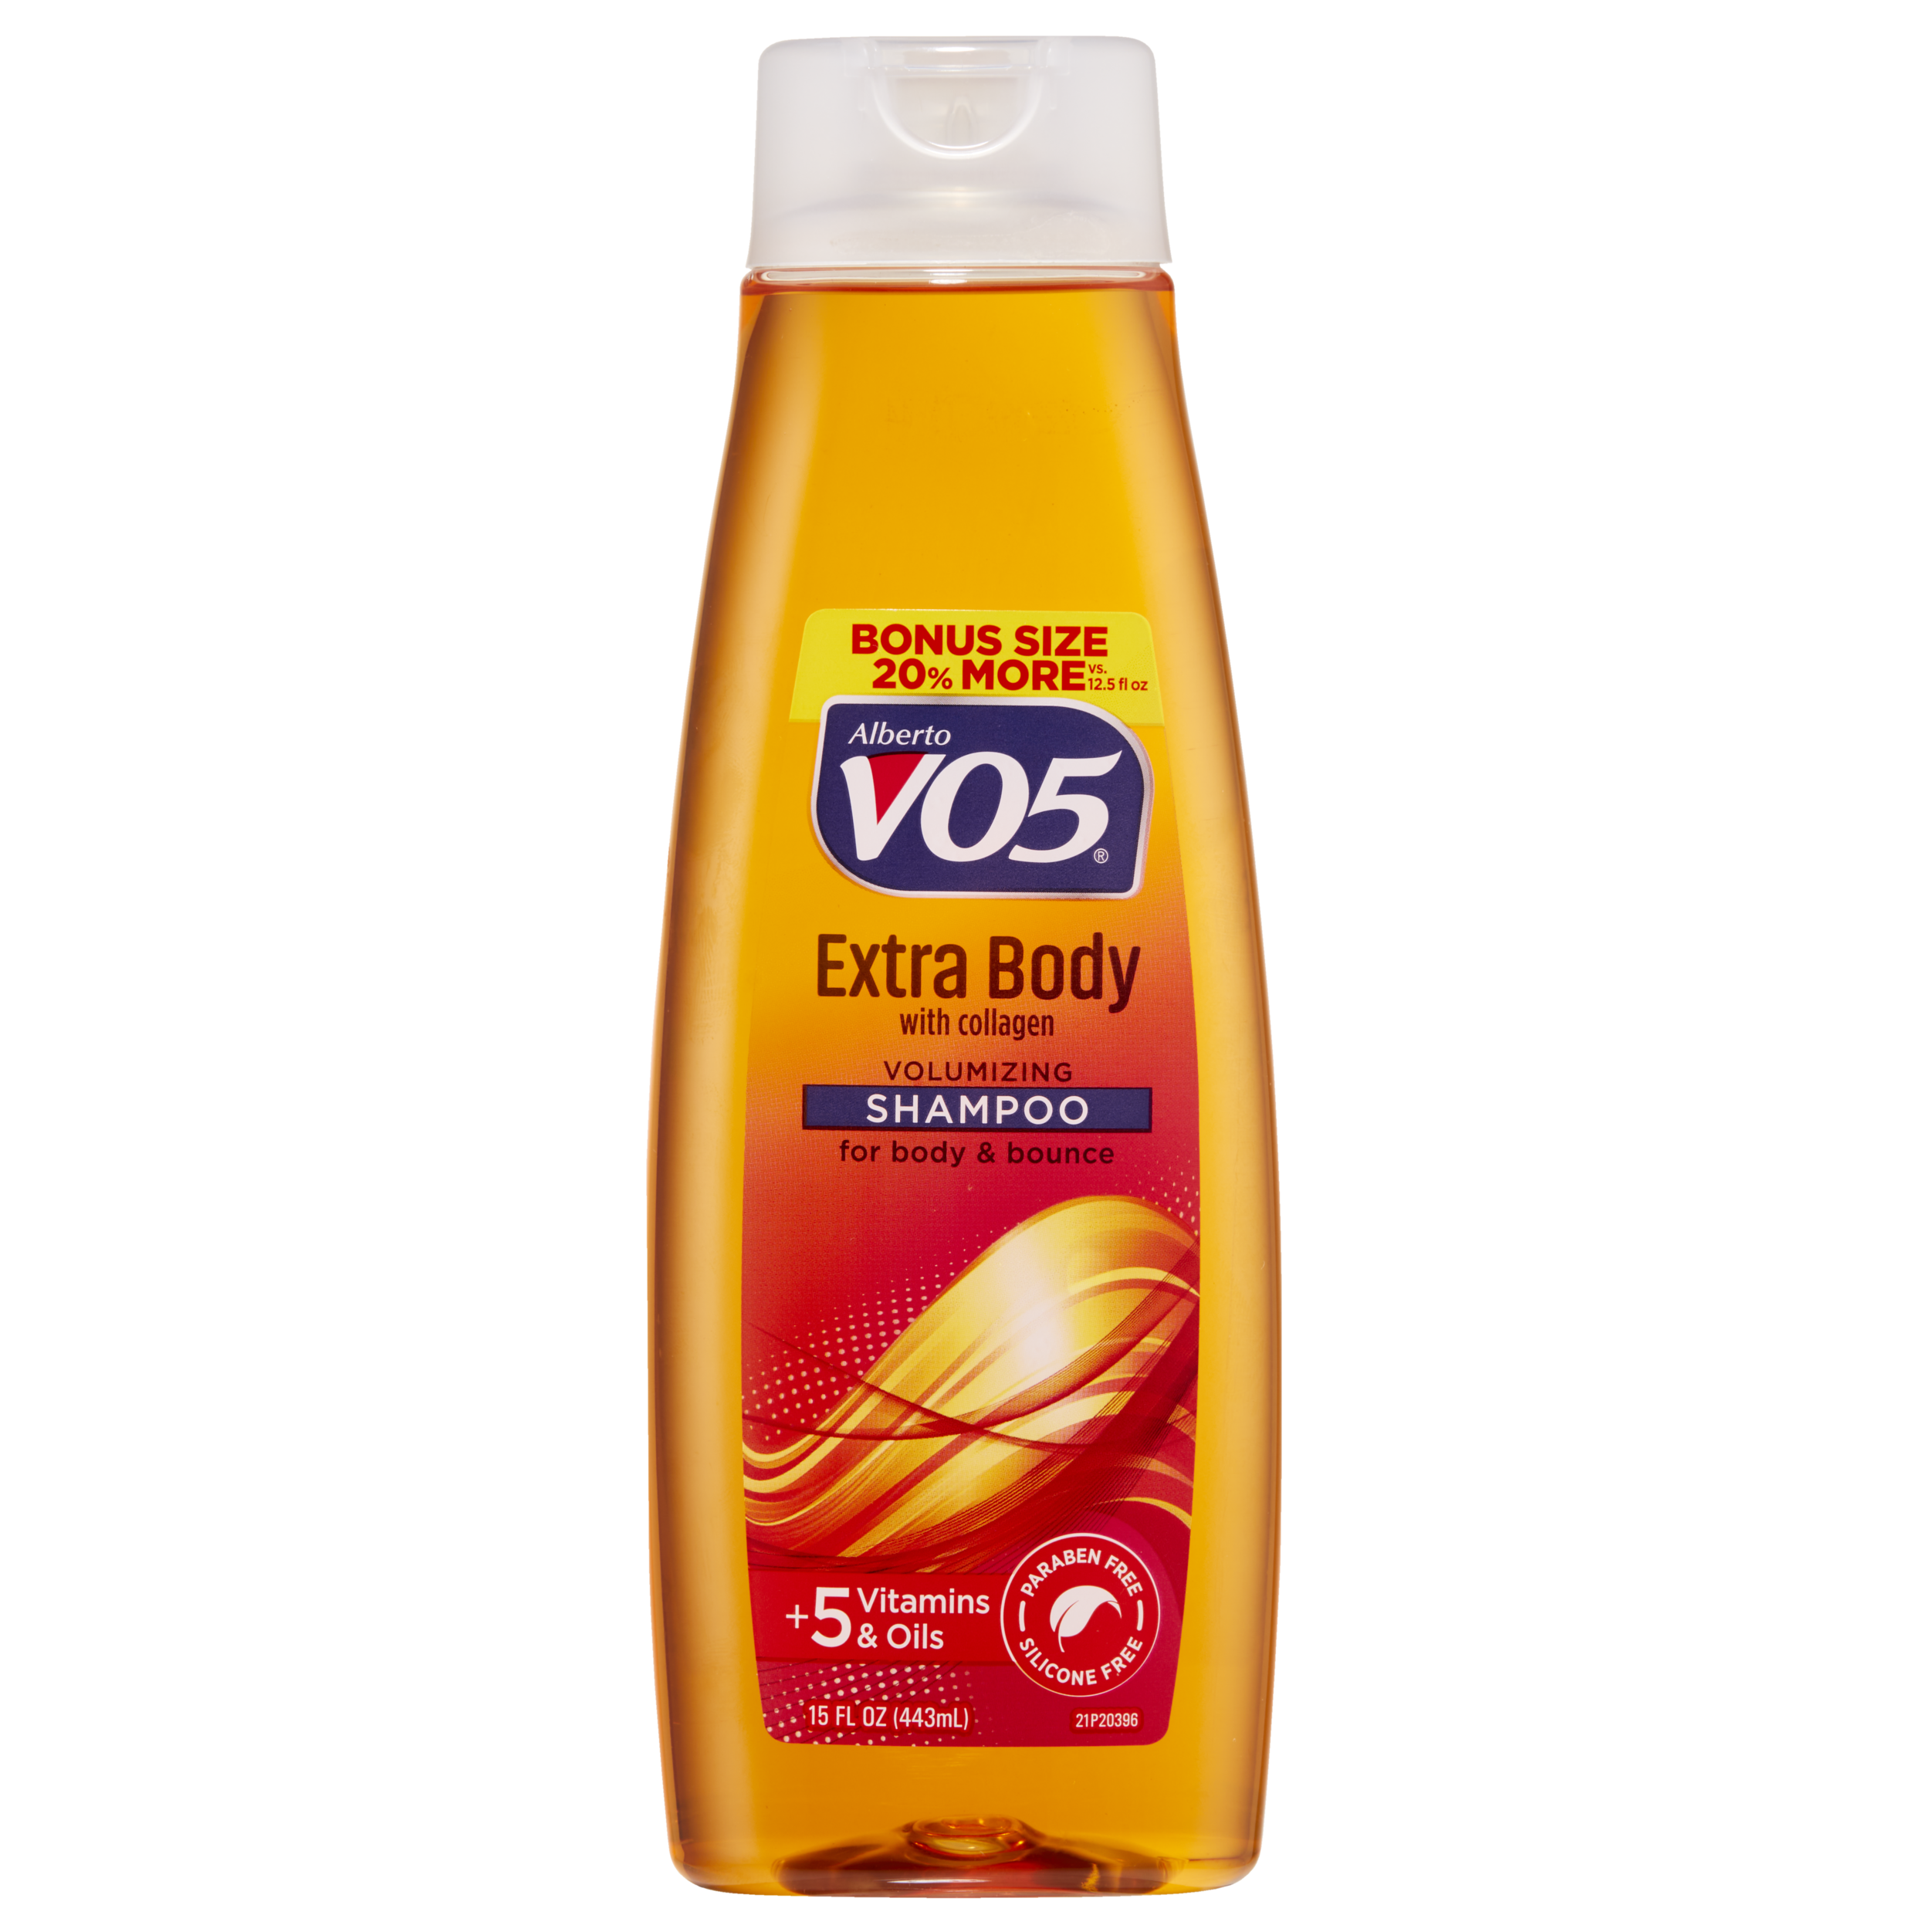 Alberto VO5 Extra Body Hair Shampoo, with Collagen, for Fullness and Volume, 15 fl oz - image 1 of 7